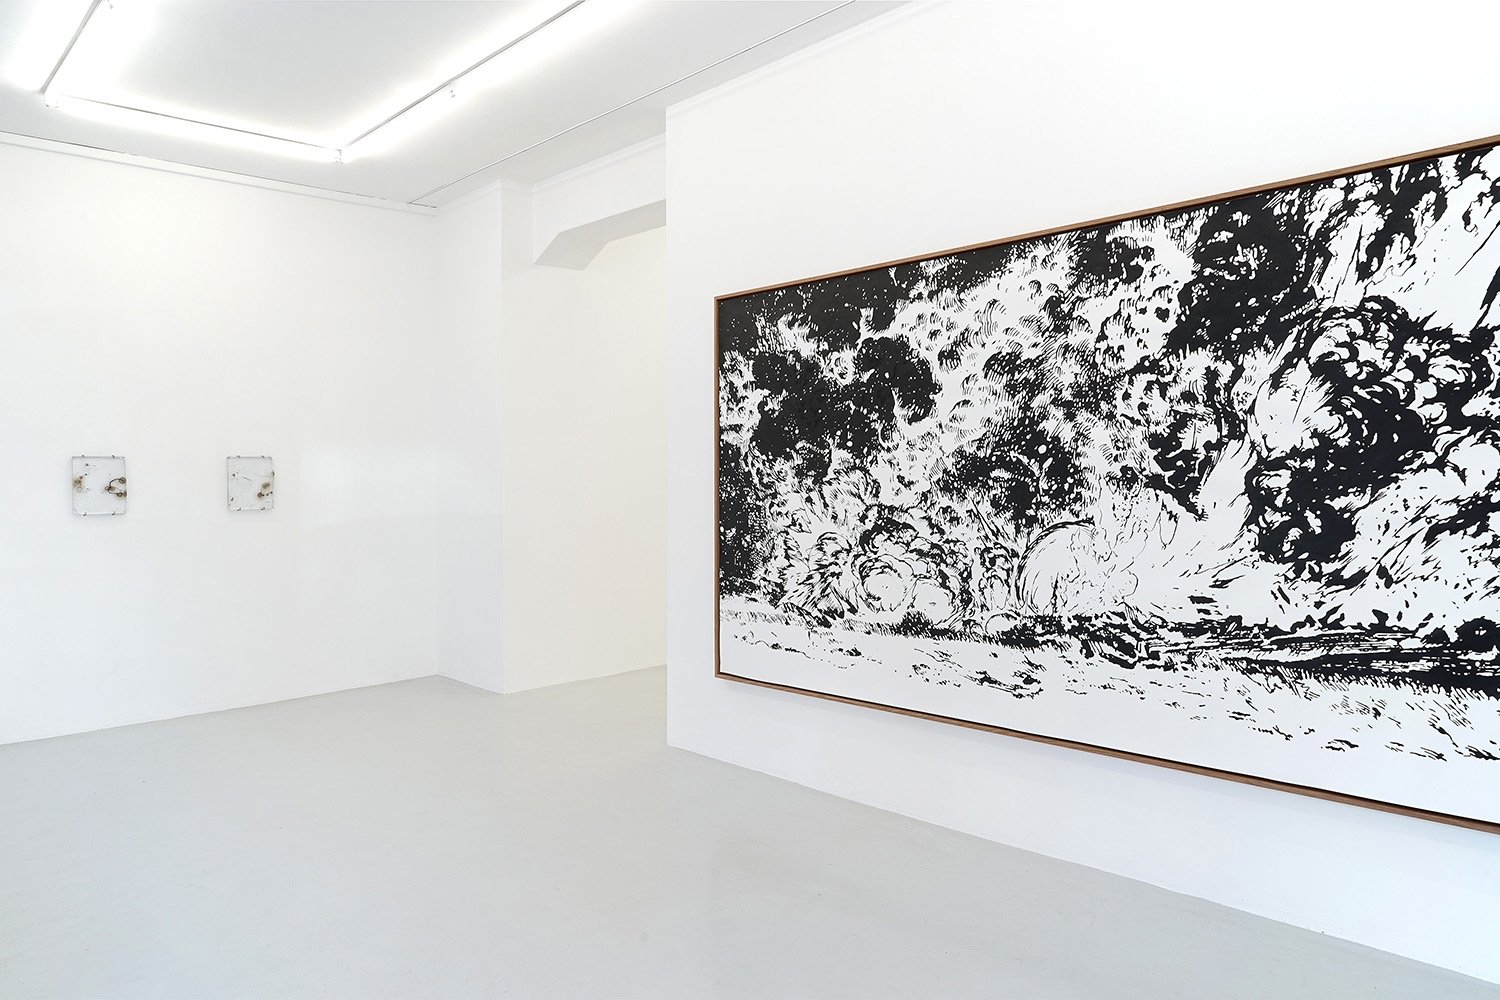  left: by Julia Steiner,  cosmos (branch) I and lll,  2019, glass, branches, unique, 35 x 28 x 4 cm  right:  Nothing Else Matters , 2021, ink on paper, 190 x 380 cm 